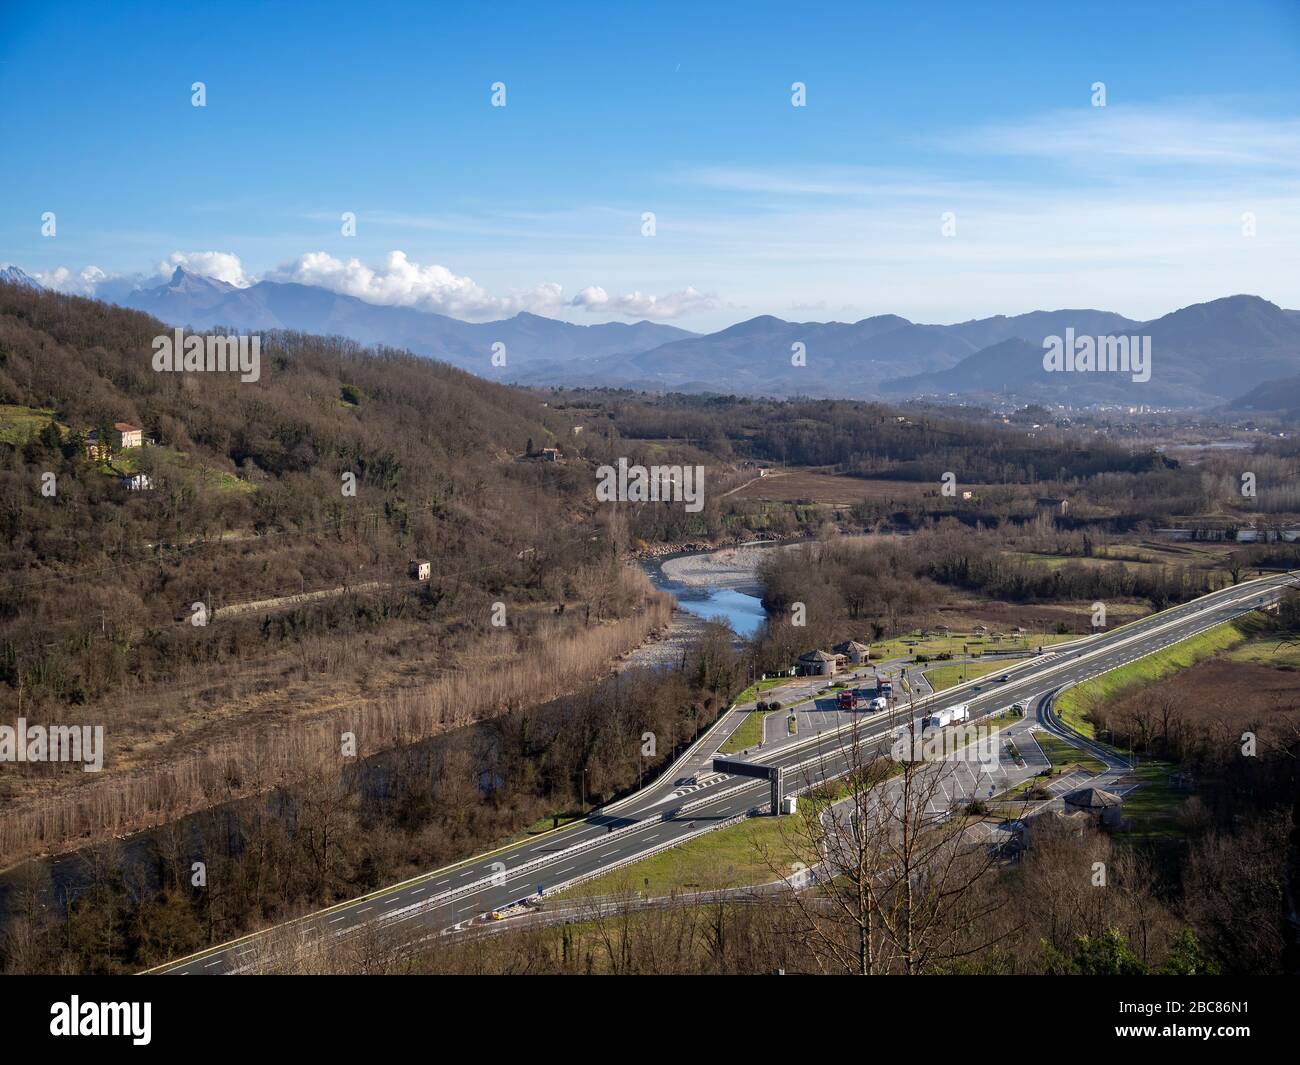 Lunigiana, north Tuscany, Italy. View from Lusuolo over motorway towards Apennine mountains. Unidentifiable vehicles etc. Sunny spring day, 2020. Stock Photo